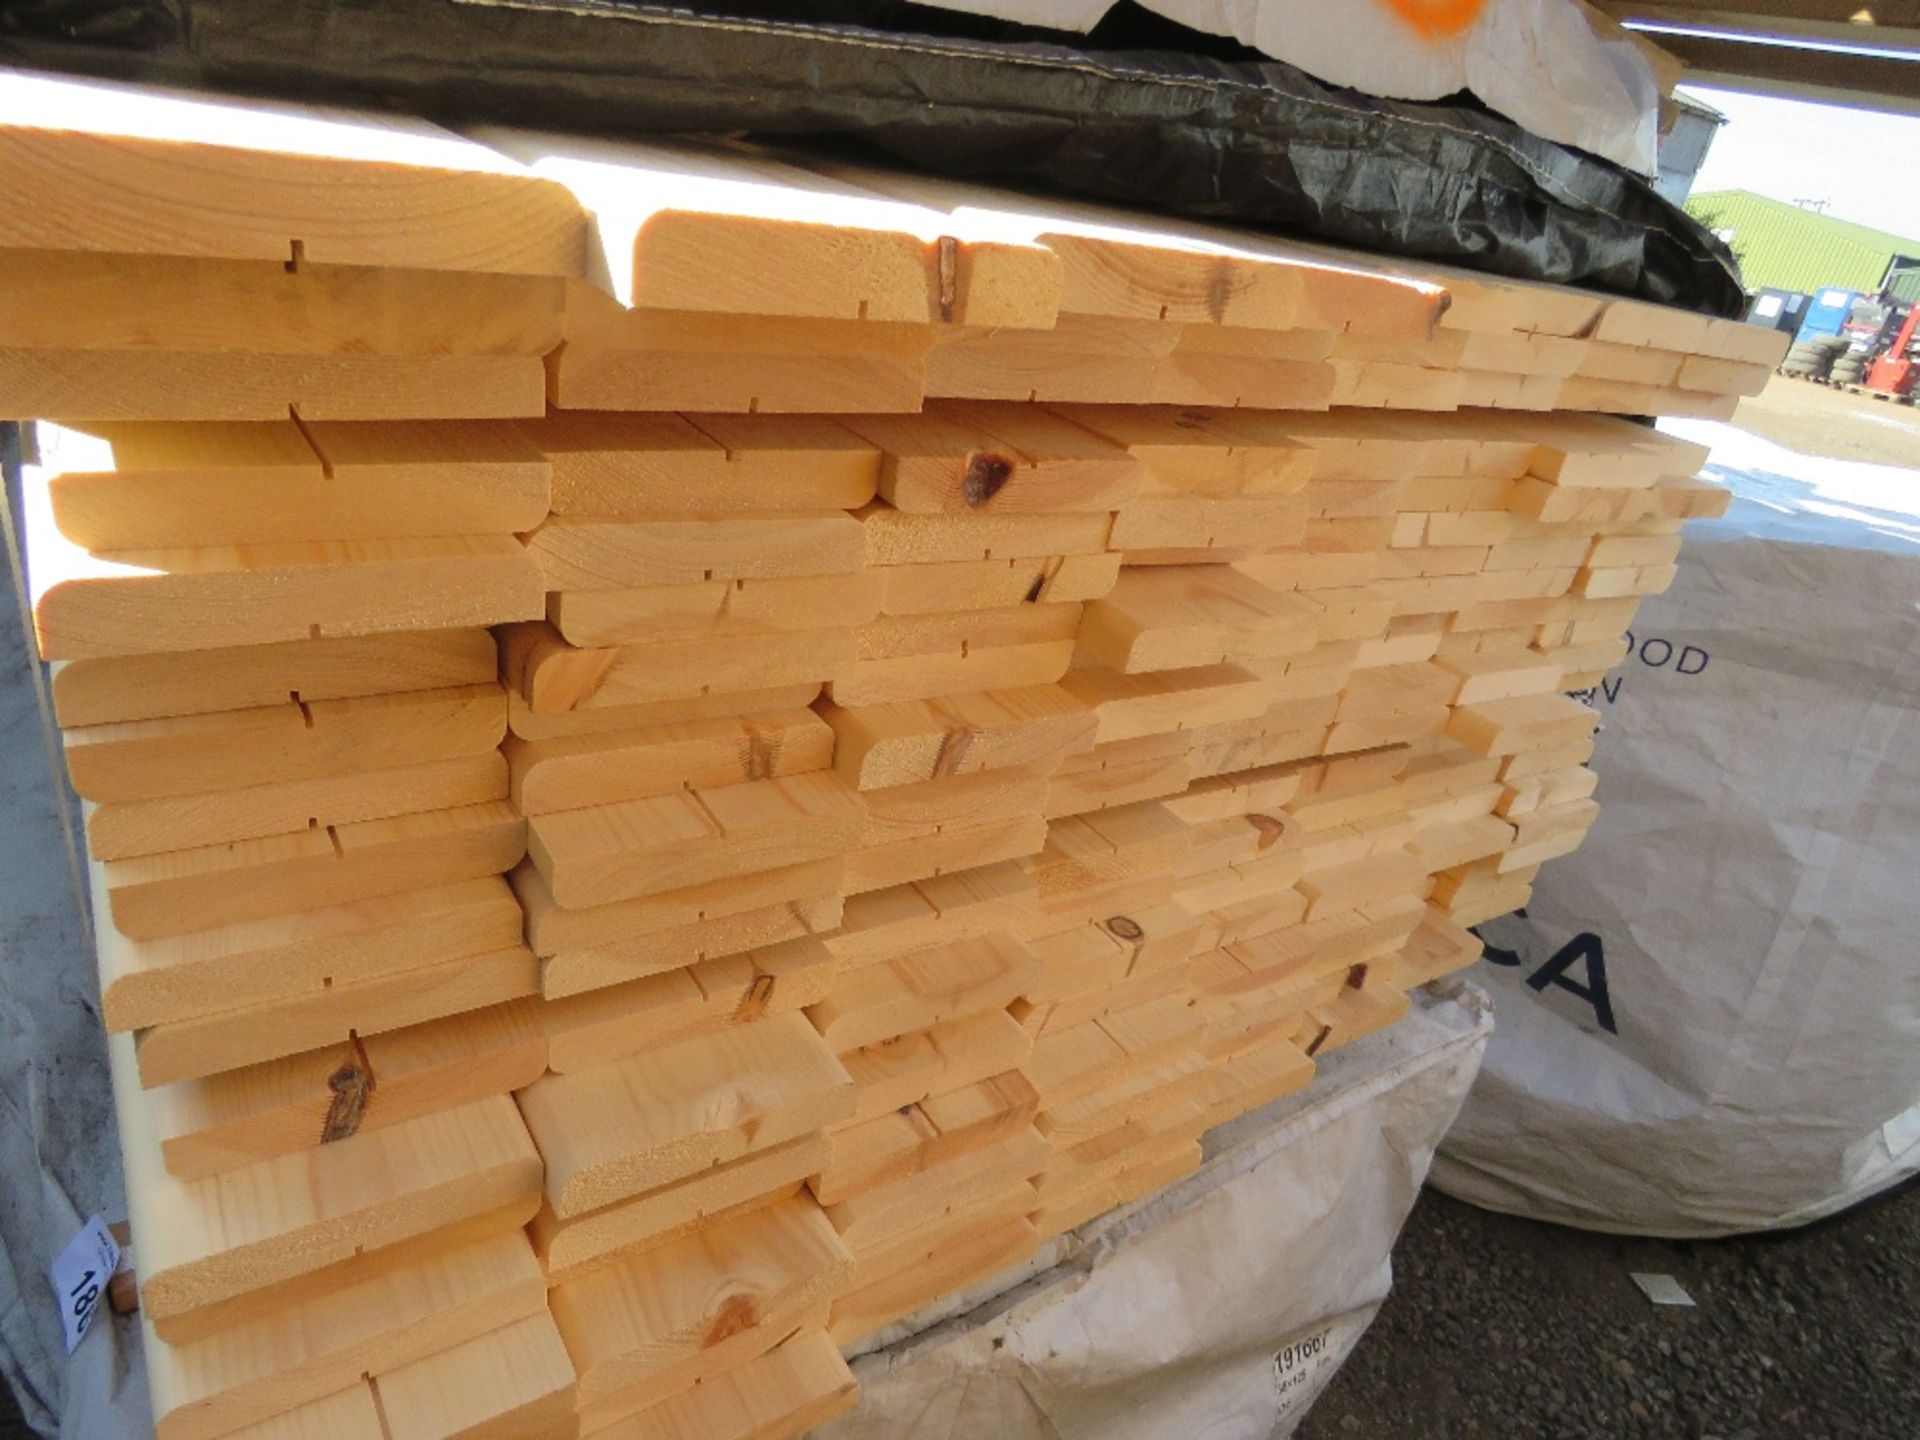 PACK OF UNTREATED MACHINED BOARDS. 1.73M LENGTH X 22 X 120MM WIDTH APPROX. - Image 2 of 3